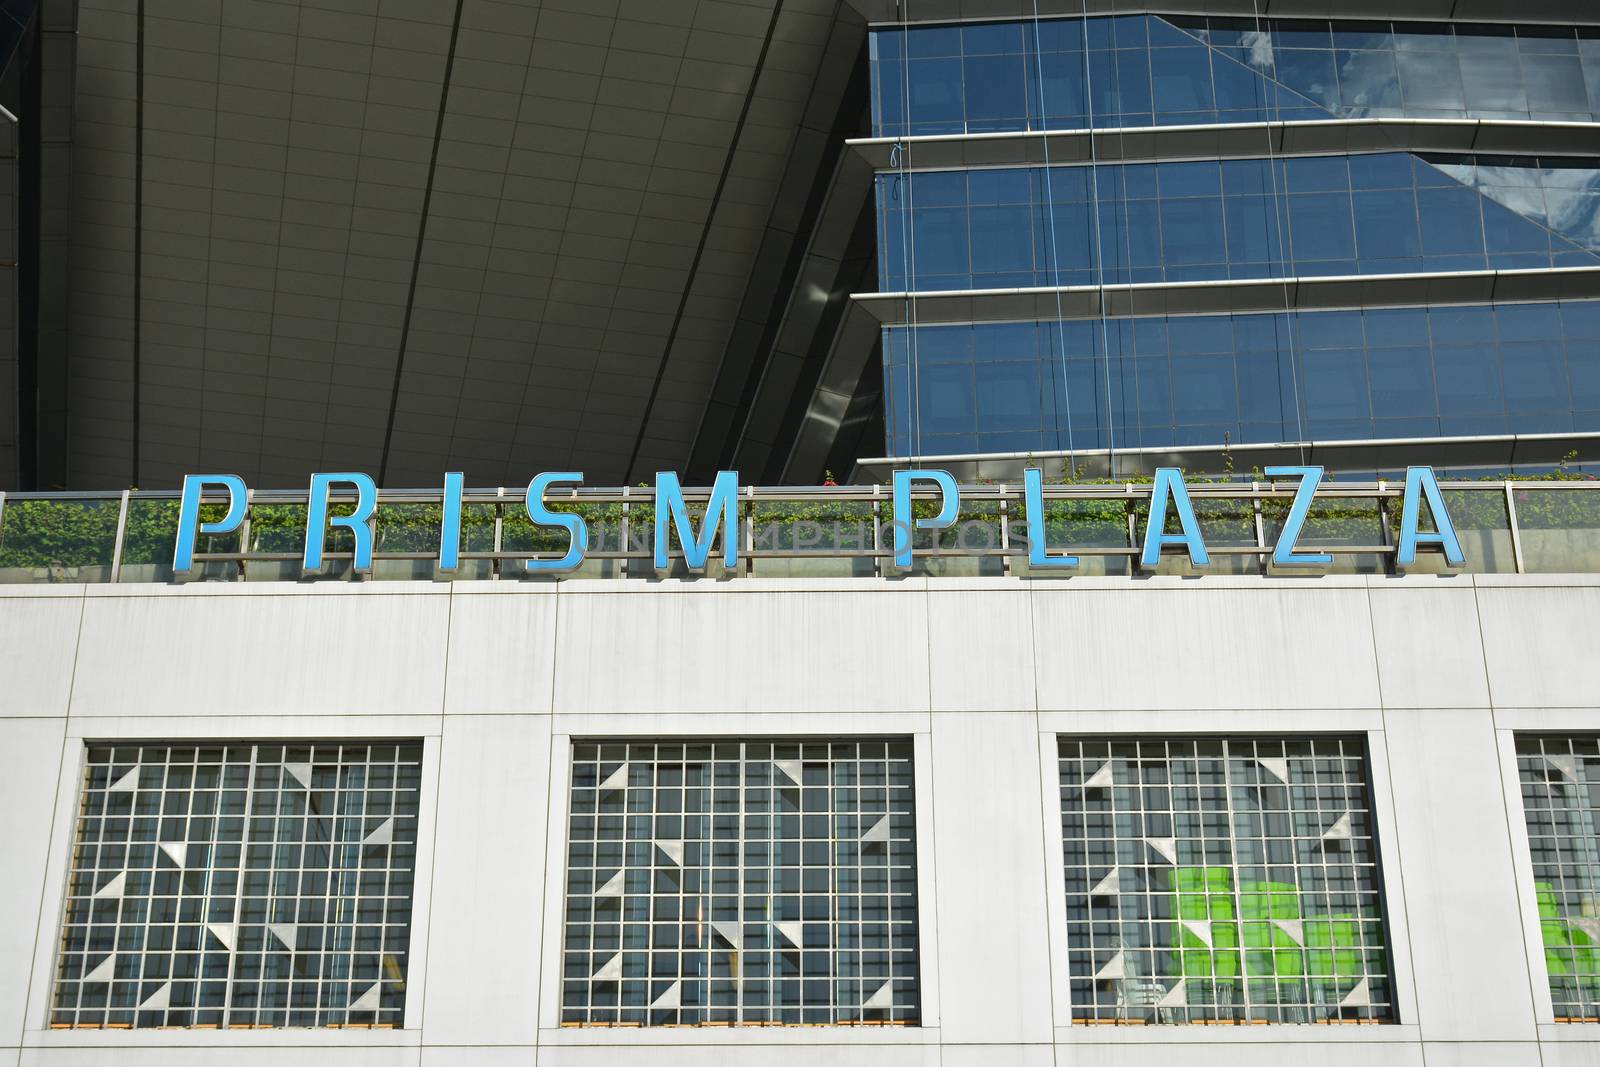 Prism Plaza at Two Ecom center building sign in Pasay, Philippin by imwaltersy